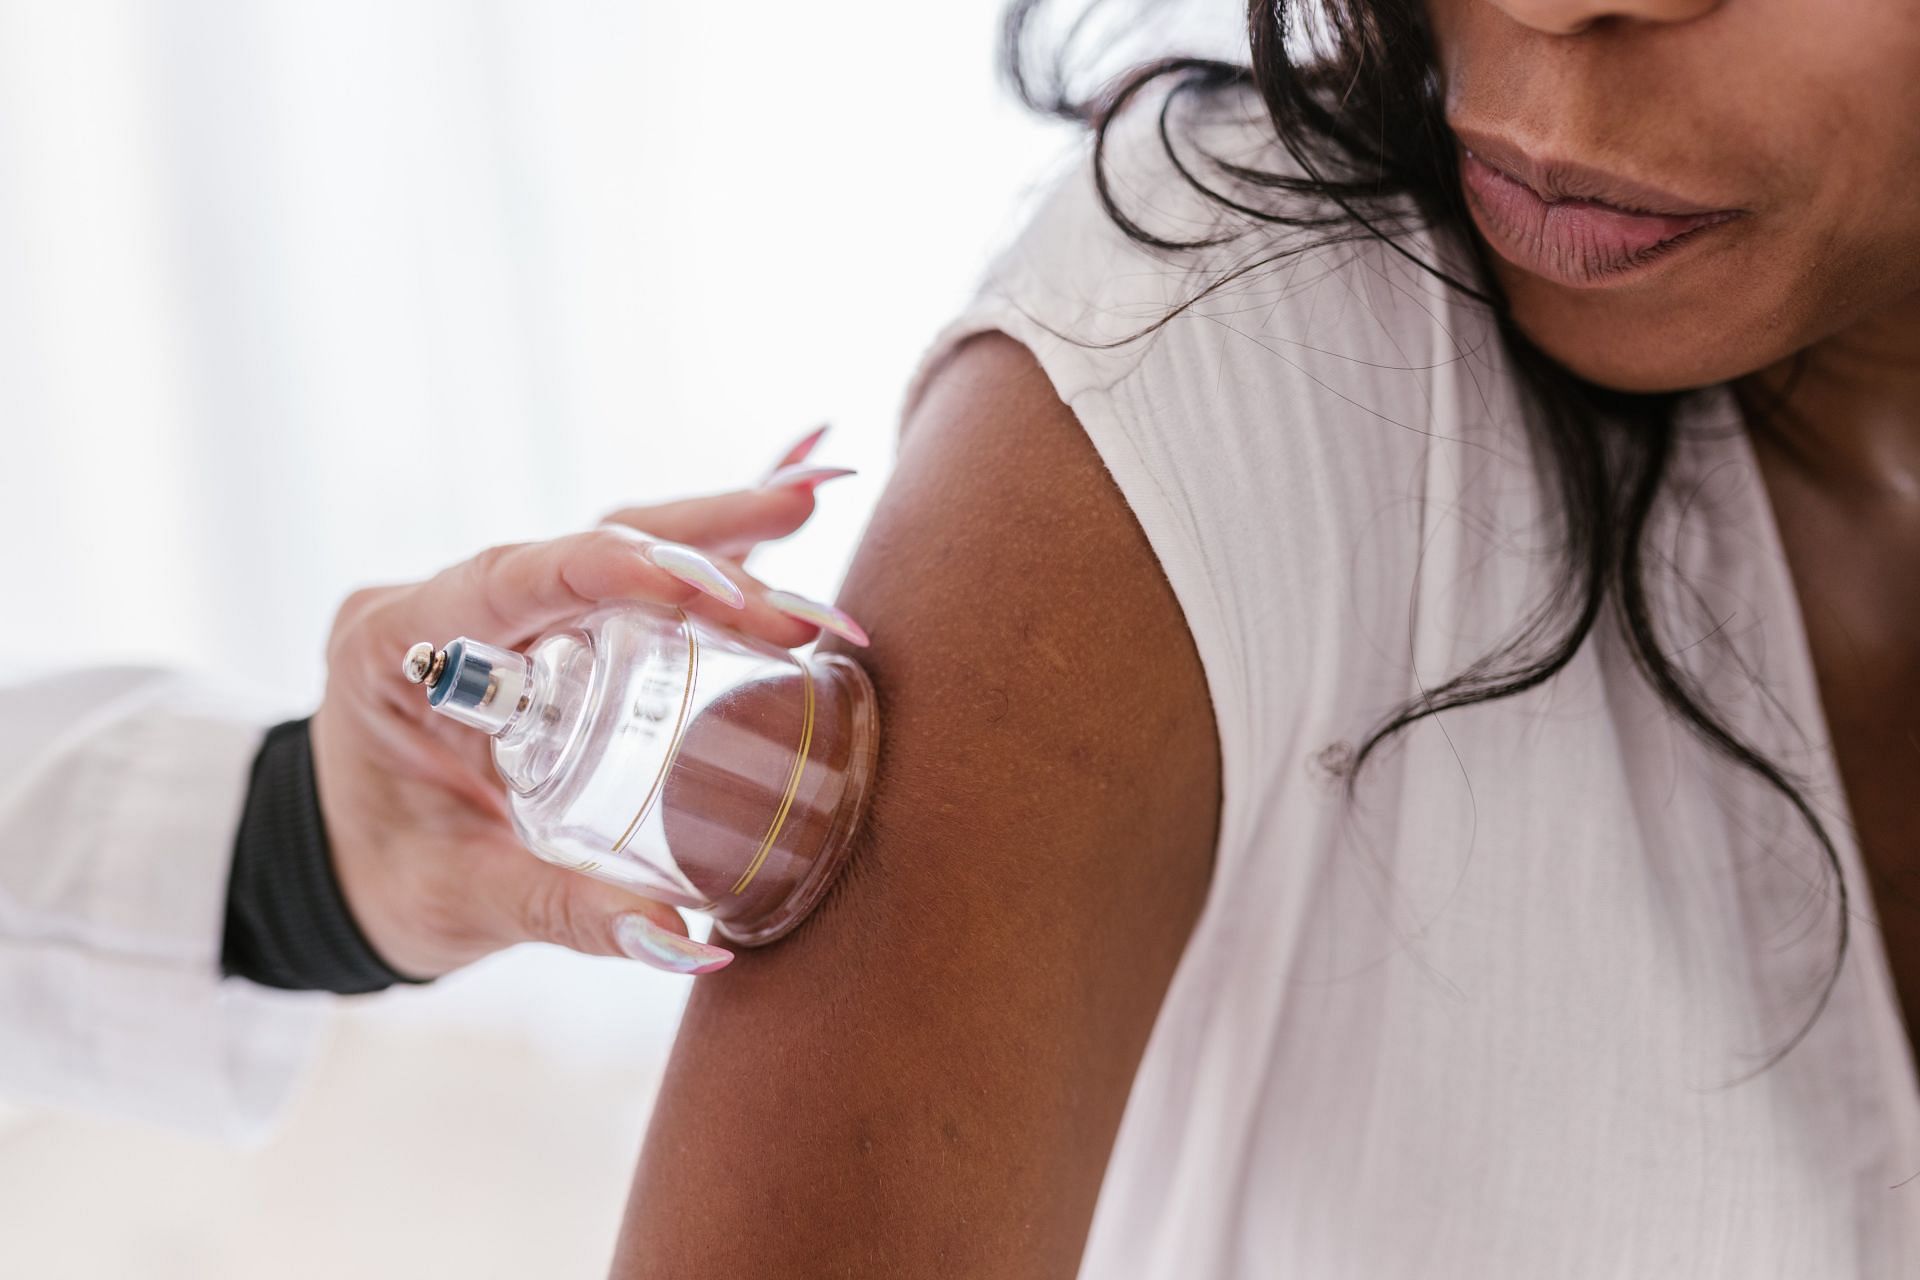 Researchers continue to investigate how cupping reduces pain and illness symptoms. (Image via Pexels/ Rodnae Productions)